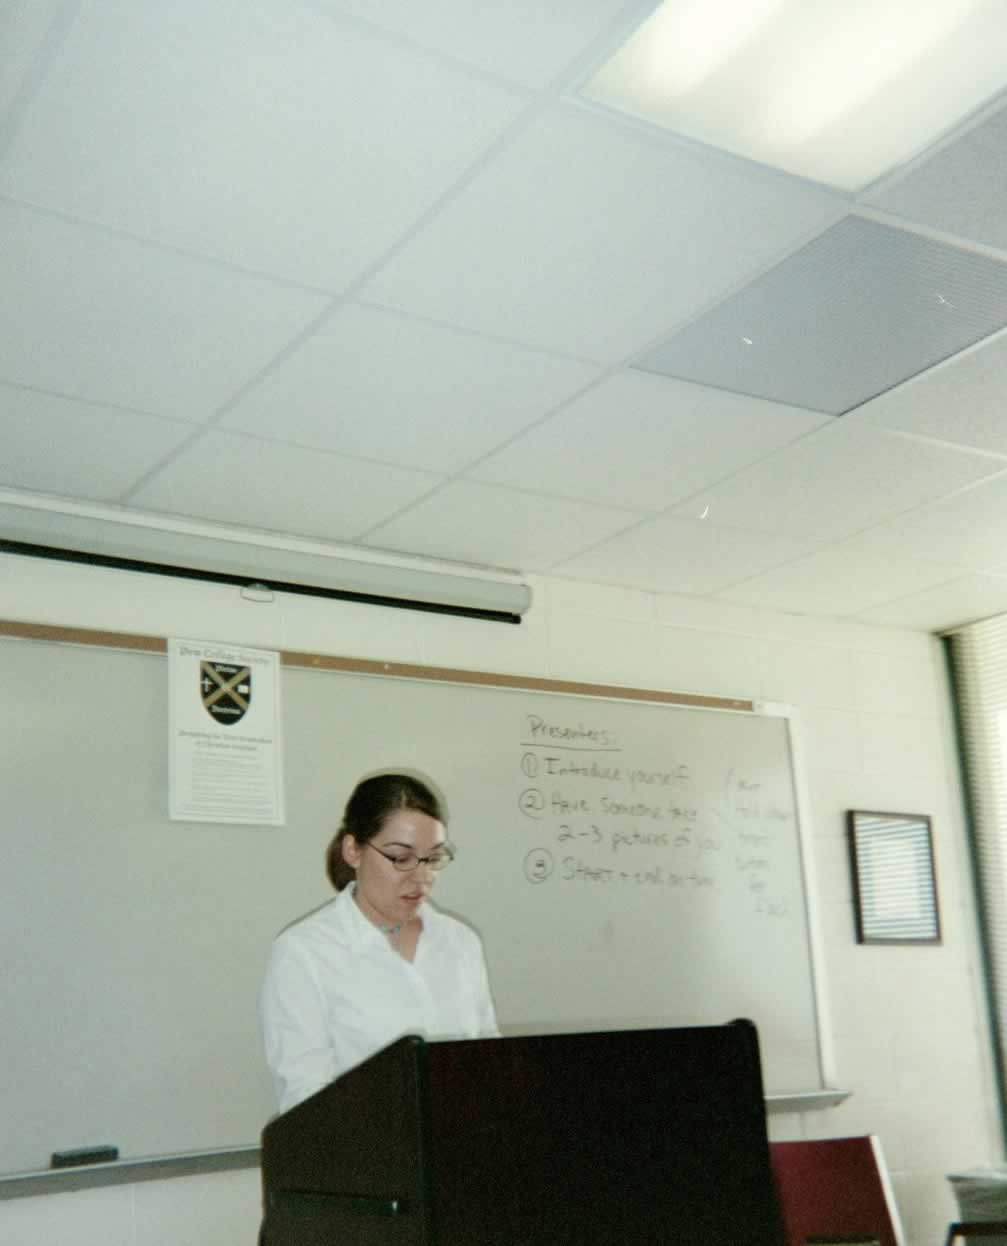 picture of a woman wearing glasses speaking behind the podium